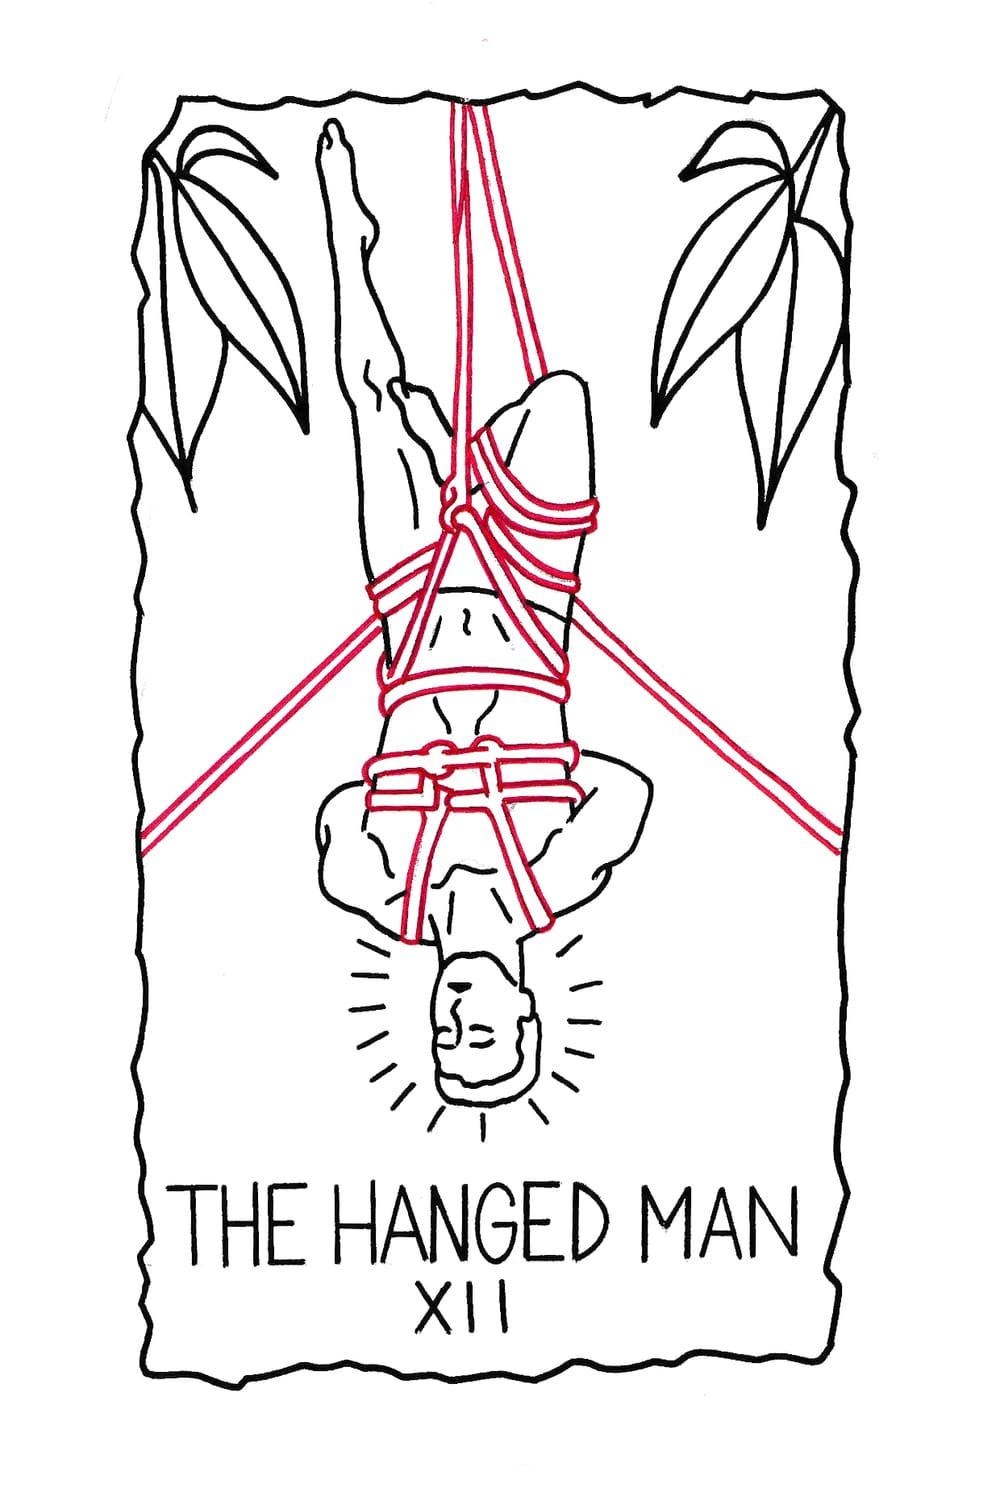 The Hanged Man (XII)